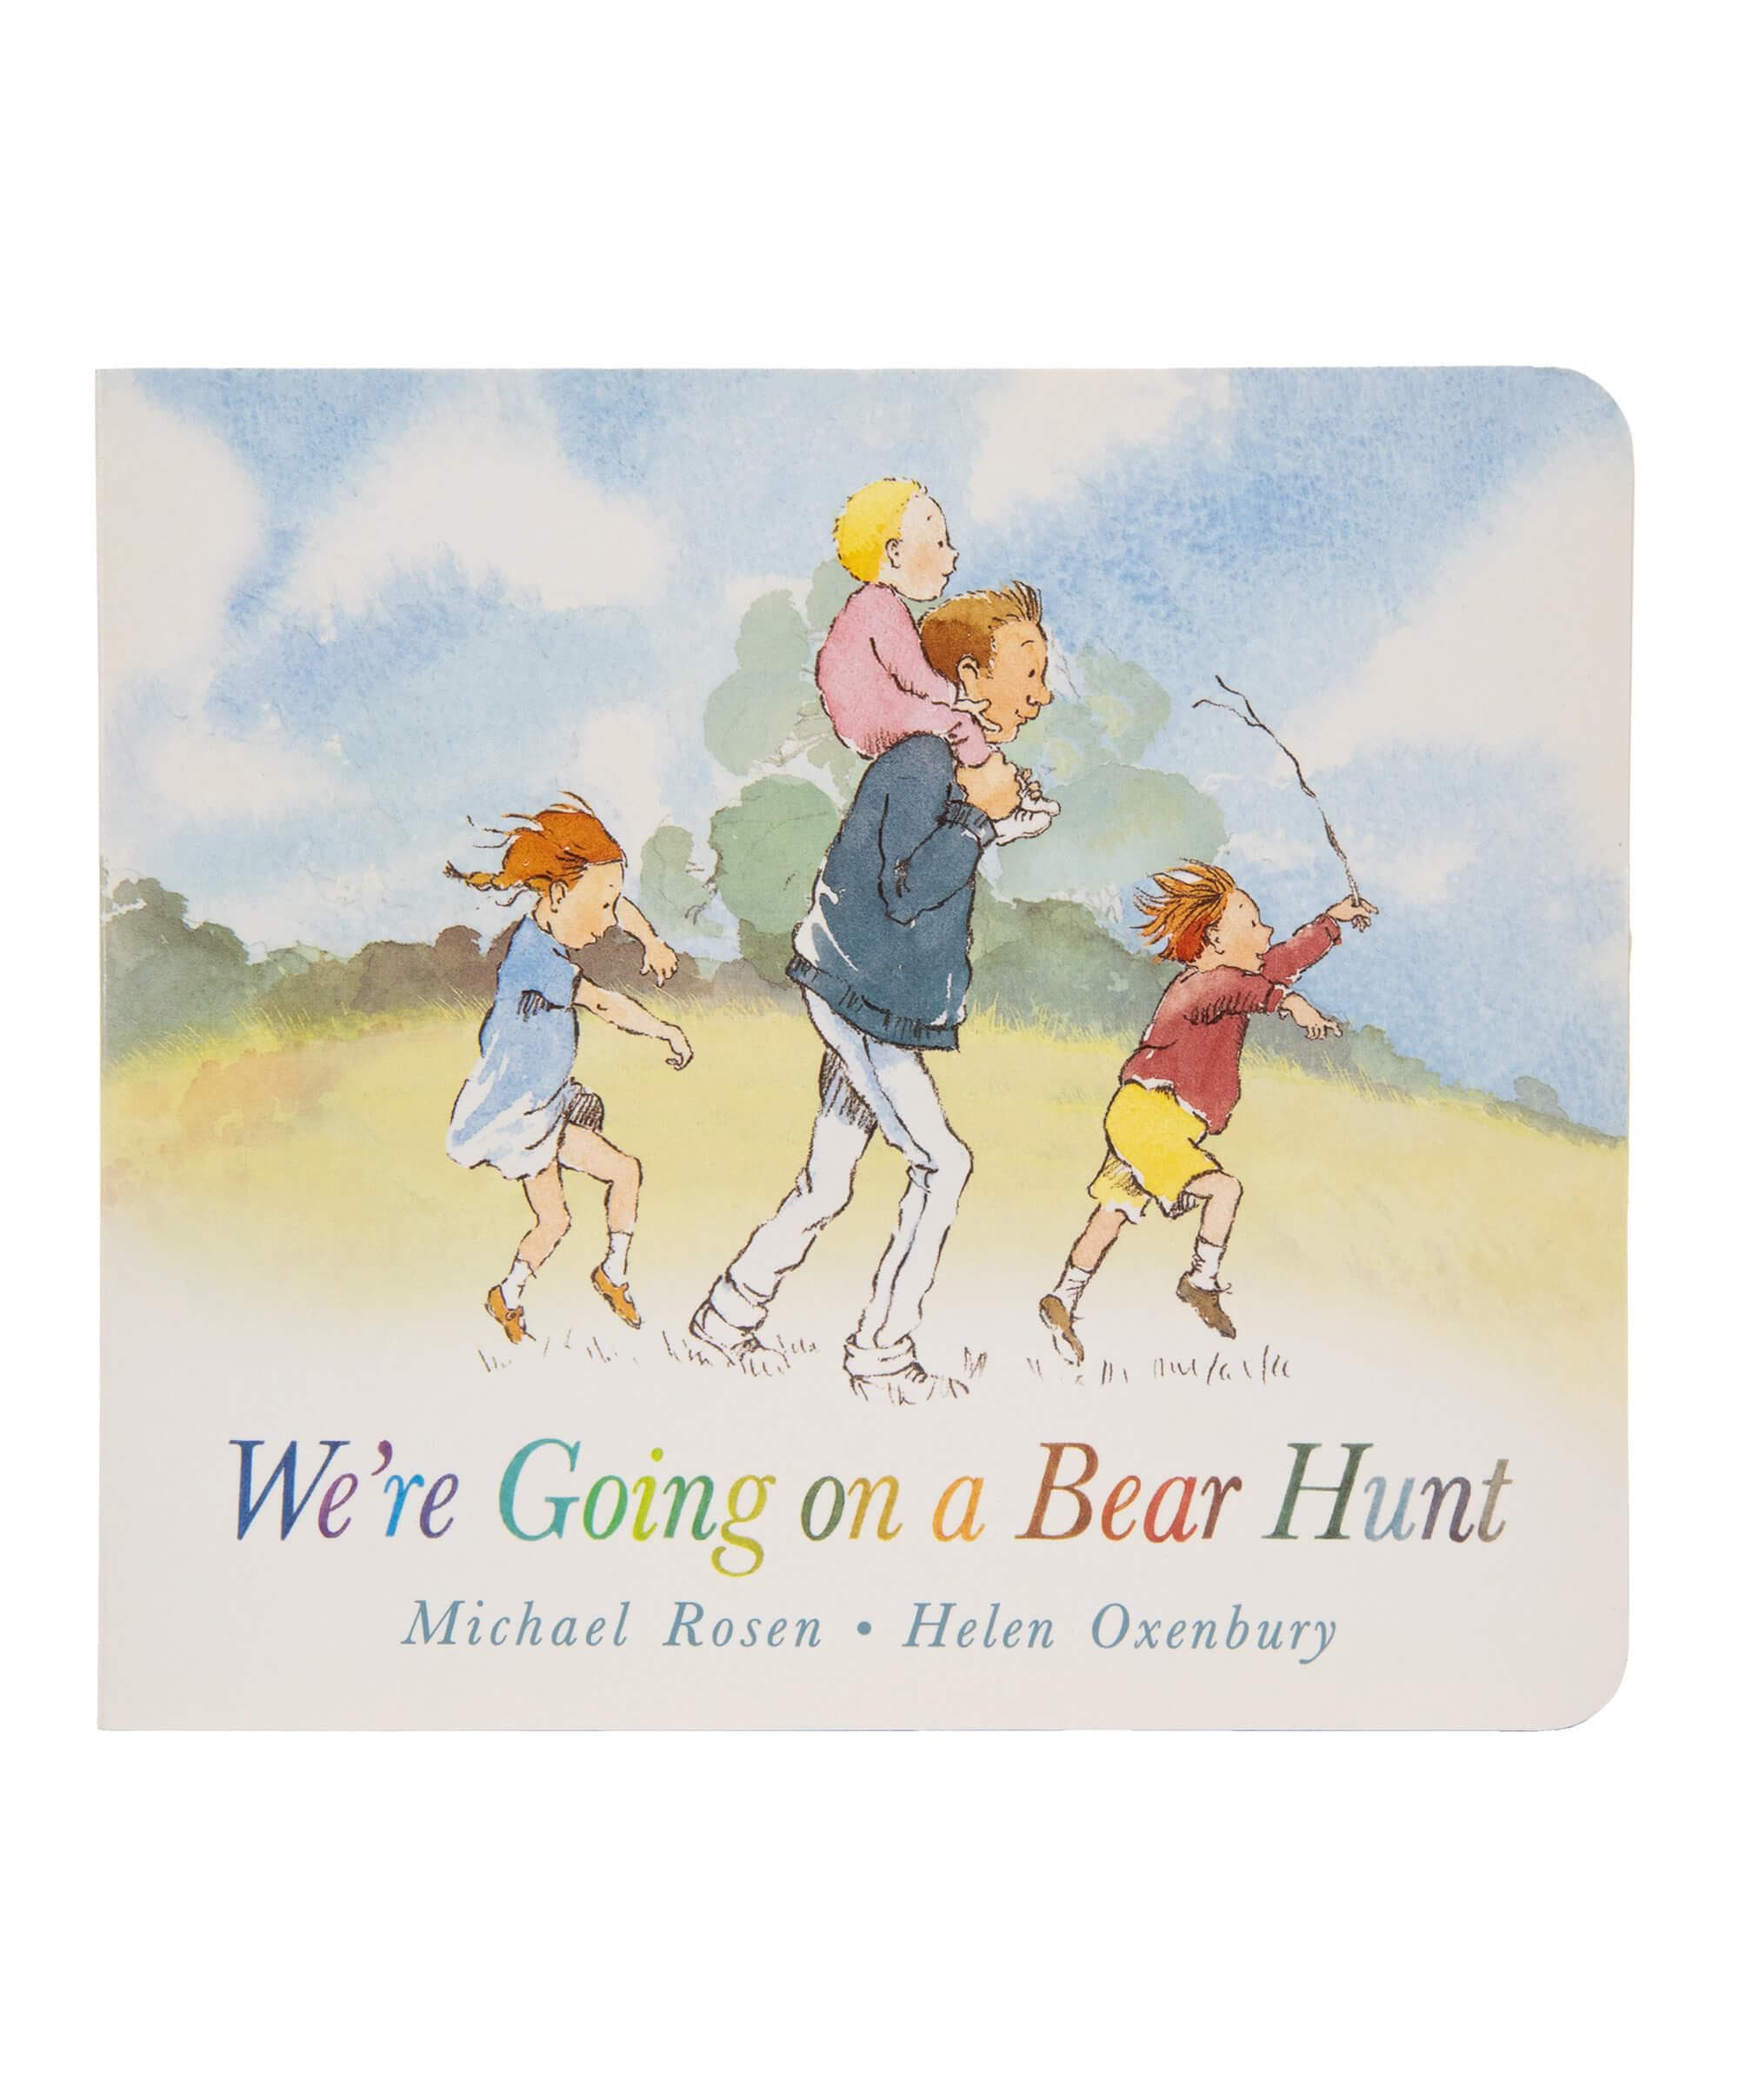 We're Going on a Bear Hunt Book